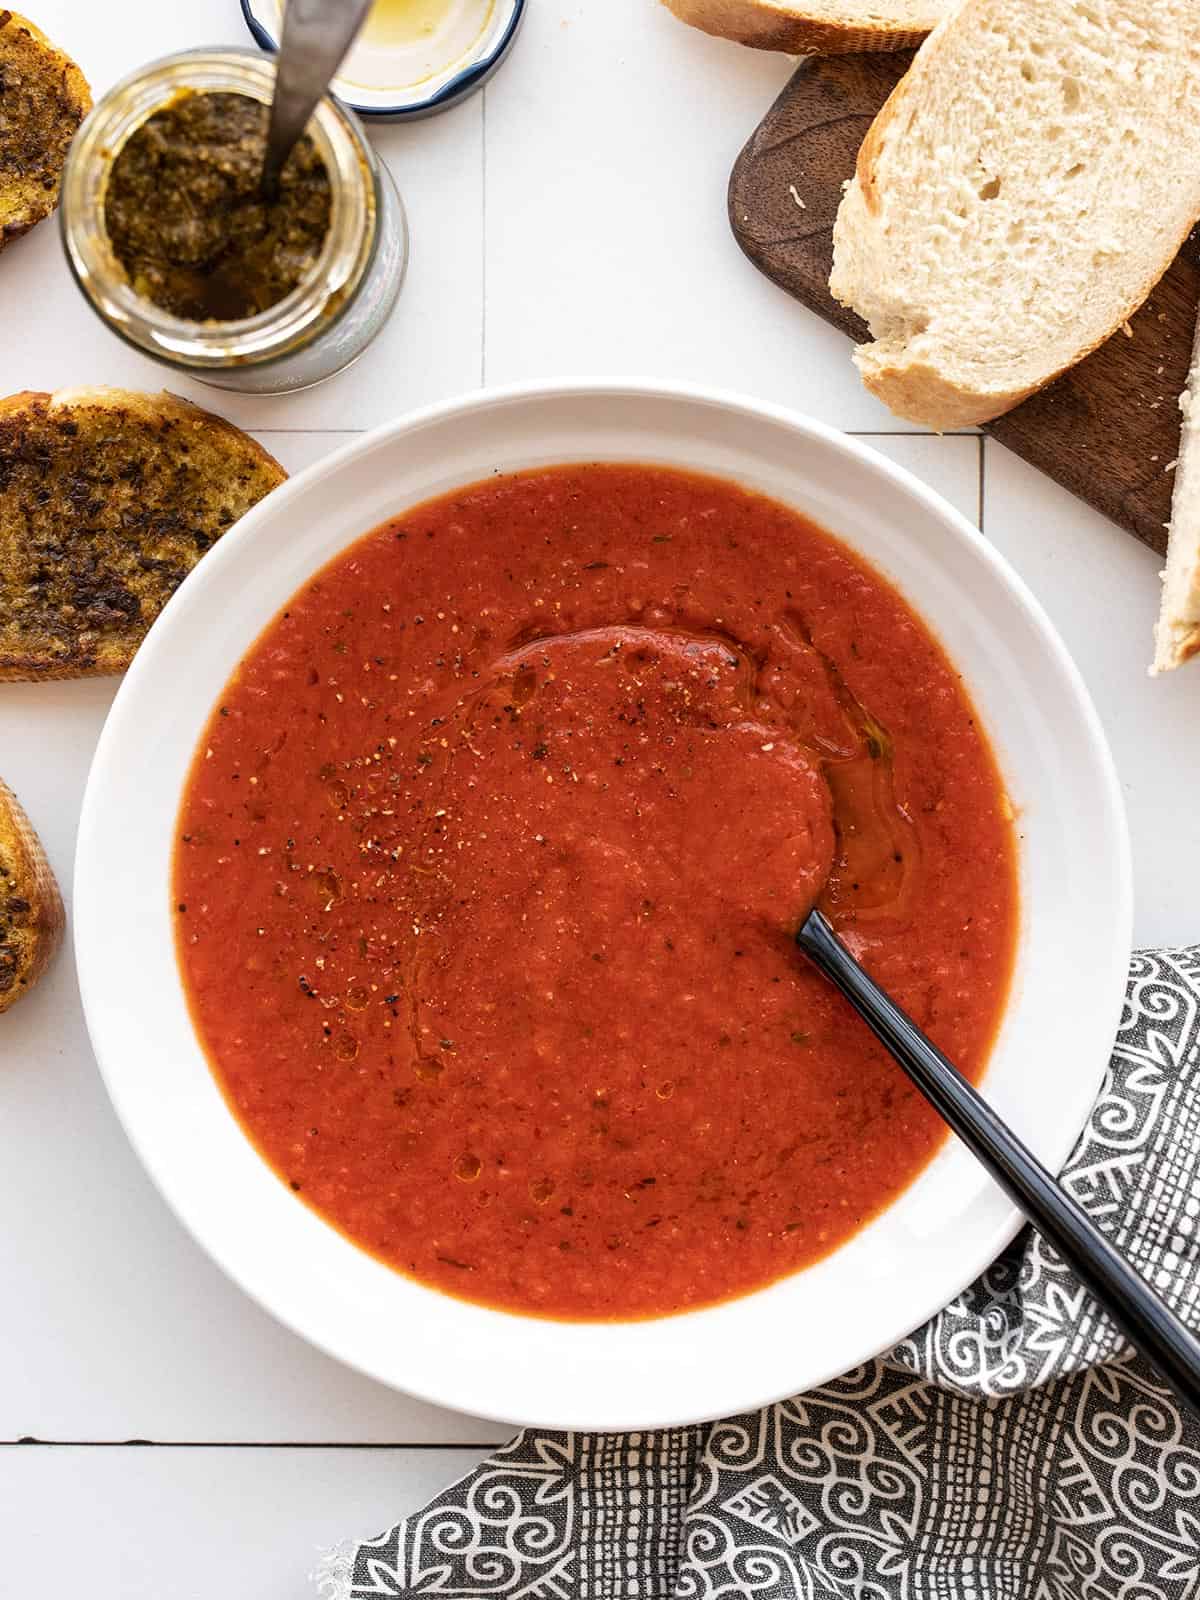 Overhead view of a bowl of roasted red pepper soup with bread and pesto on the sides